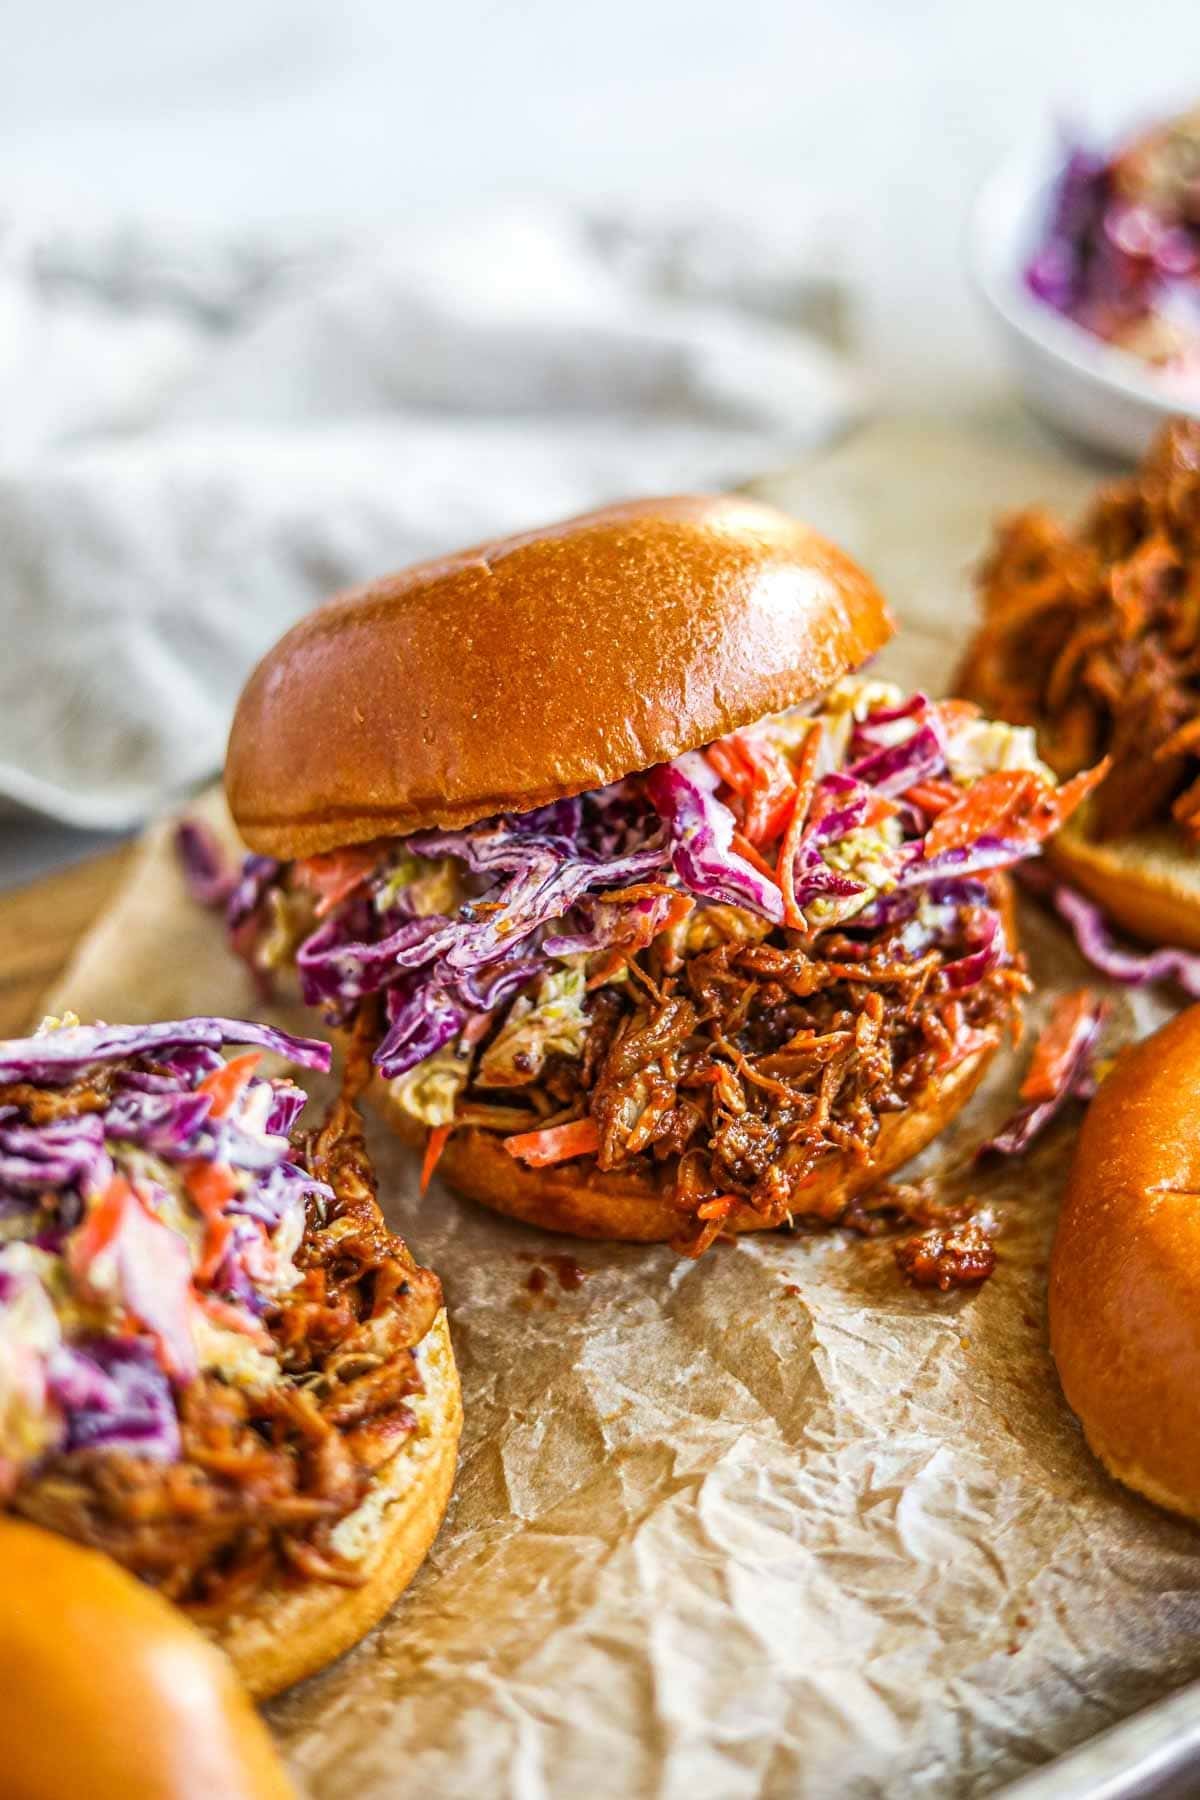 Buns with coleslaw and shredded chicken meat filling.